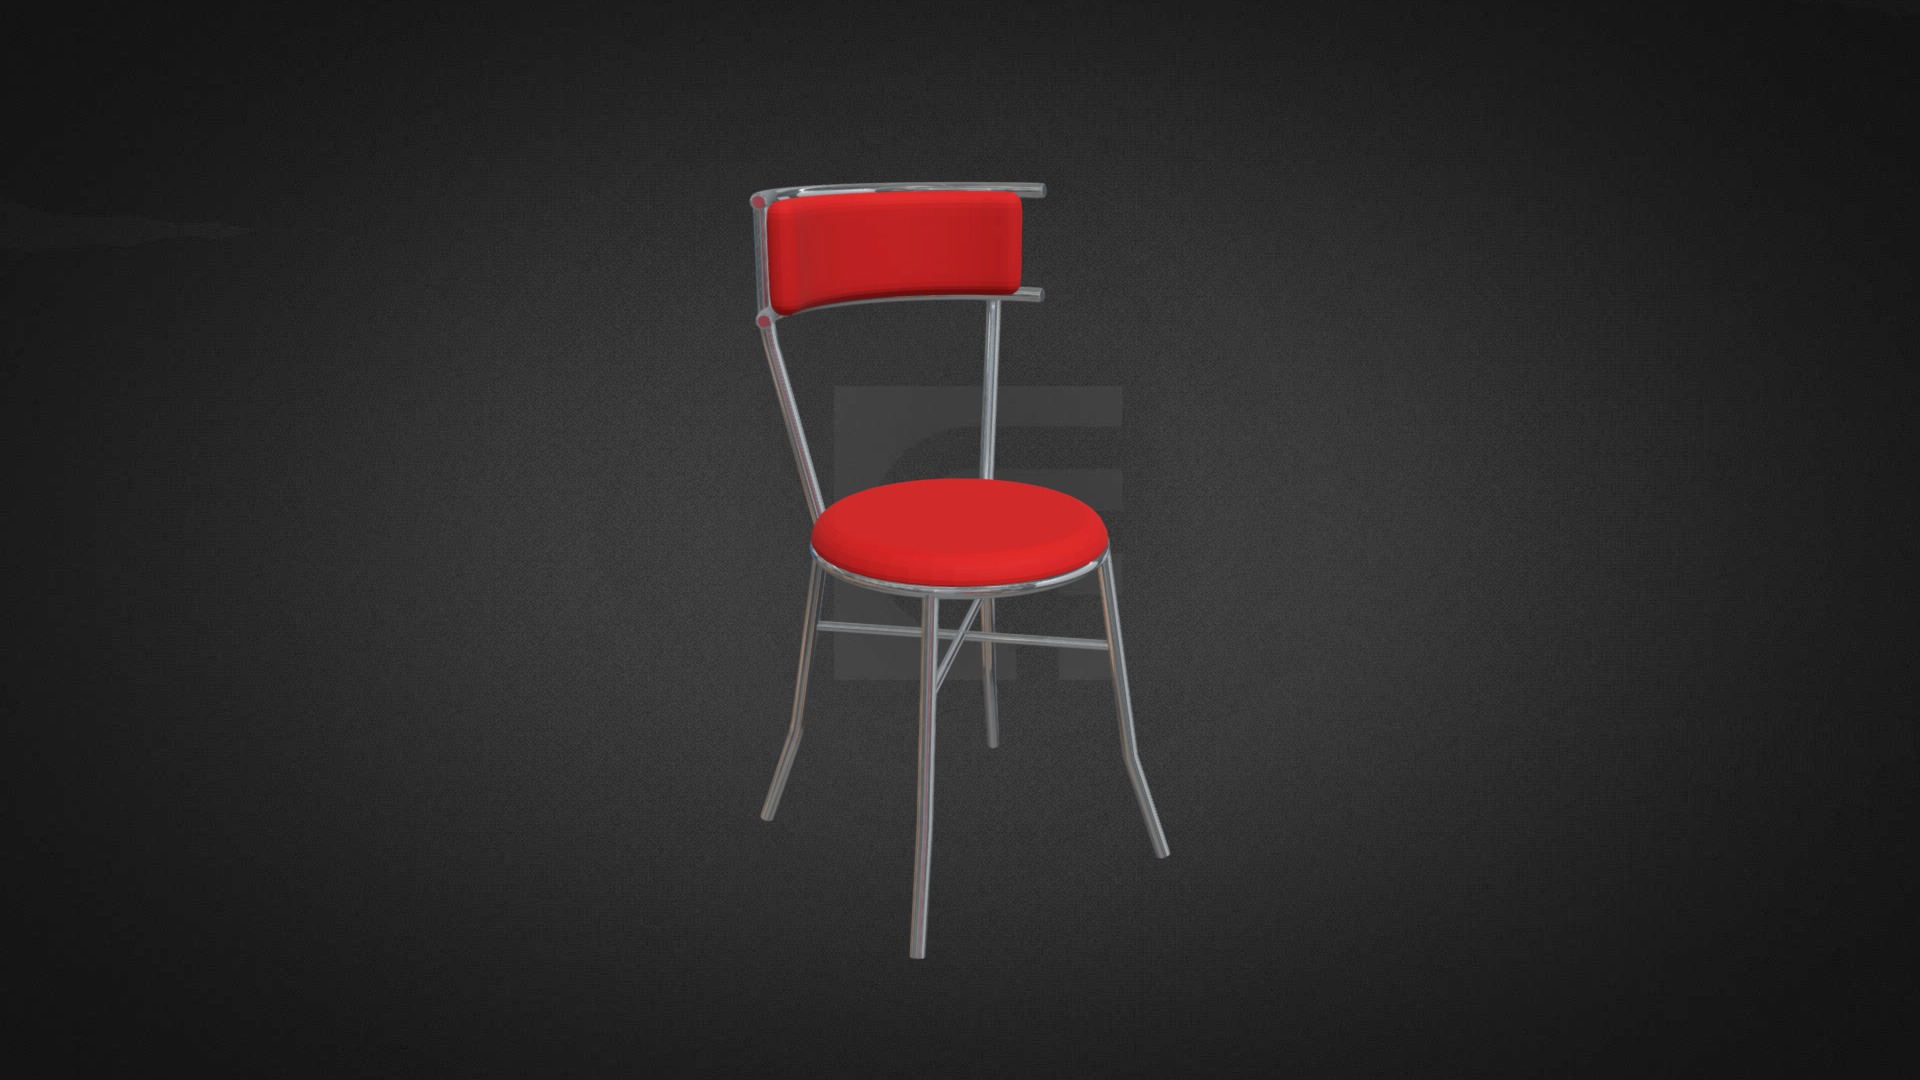 3D model Farno Chair Hire - This is a 3D model of the Farno Chair Hire. The 3D model is about a chair with a red cushion.